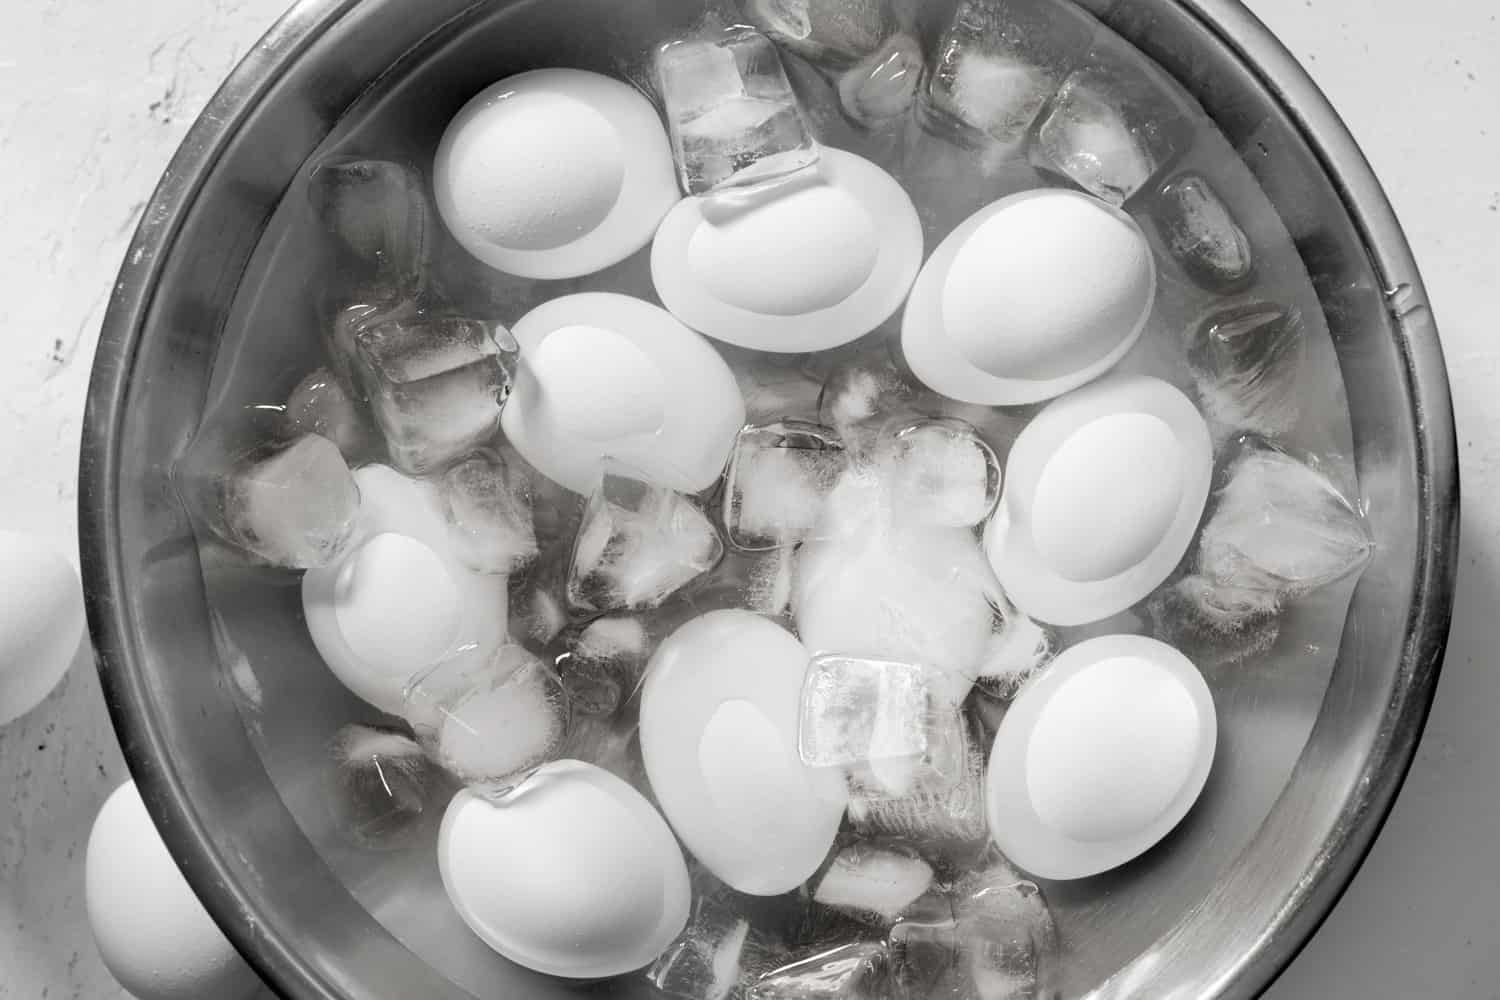 Hard Boiled Eggs in an Ice Bath after Cooking